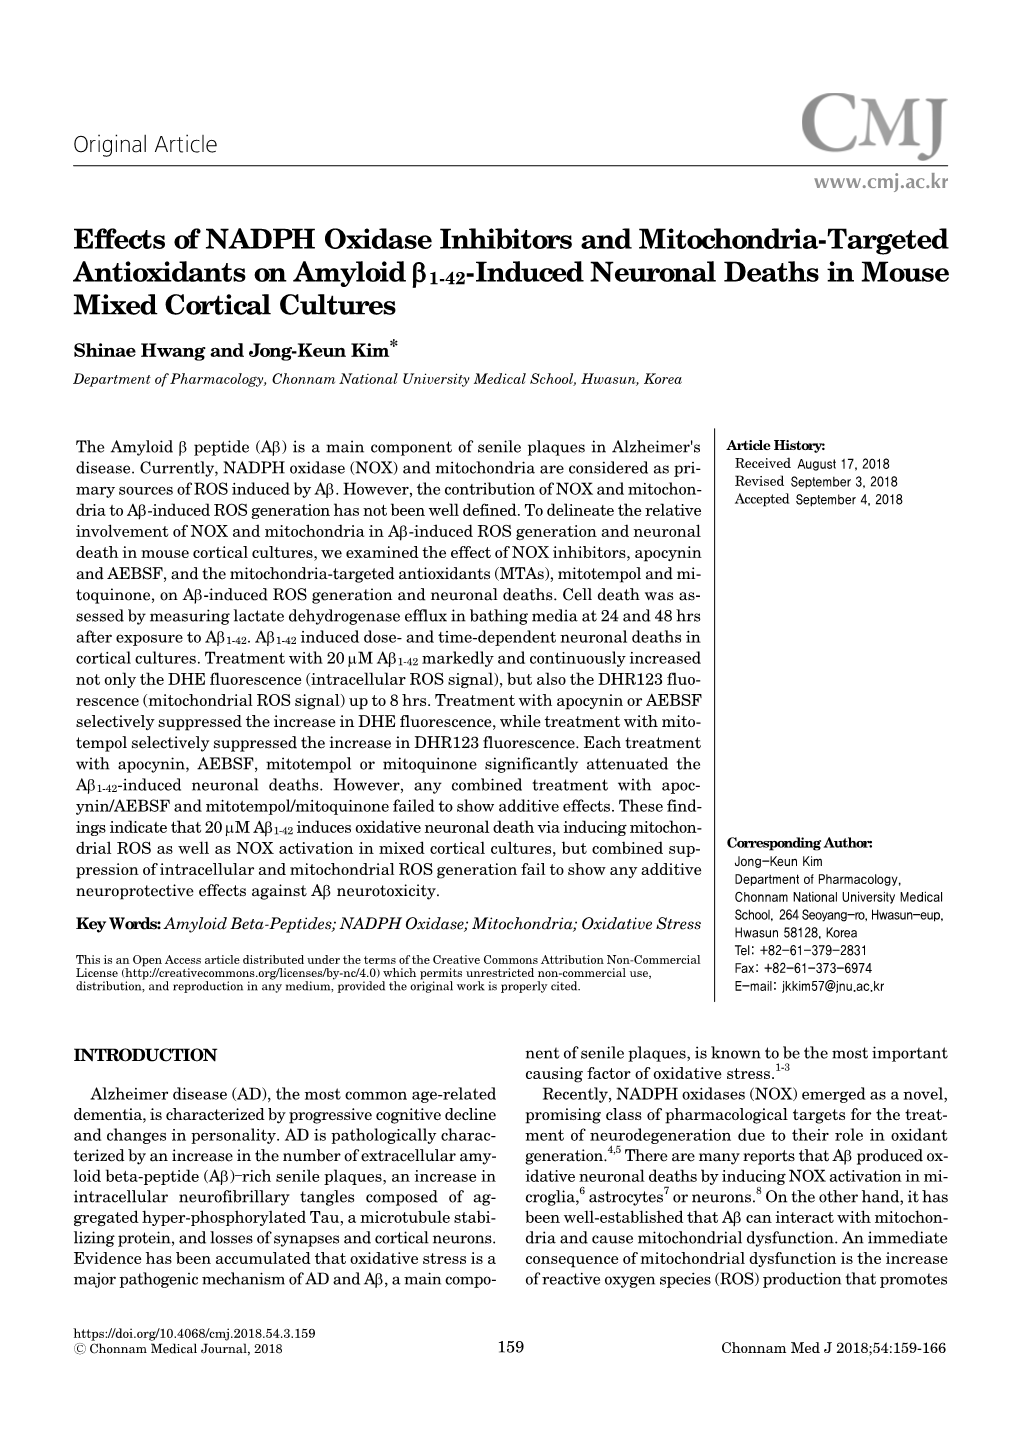 Effects of NADPH Oxidase Inhibitors and Mitochondria-Targeted Antioxidants on Amyloid 1-42-Induced Neuronal Deaths in Mouse Mixed Cortical Cultures